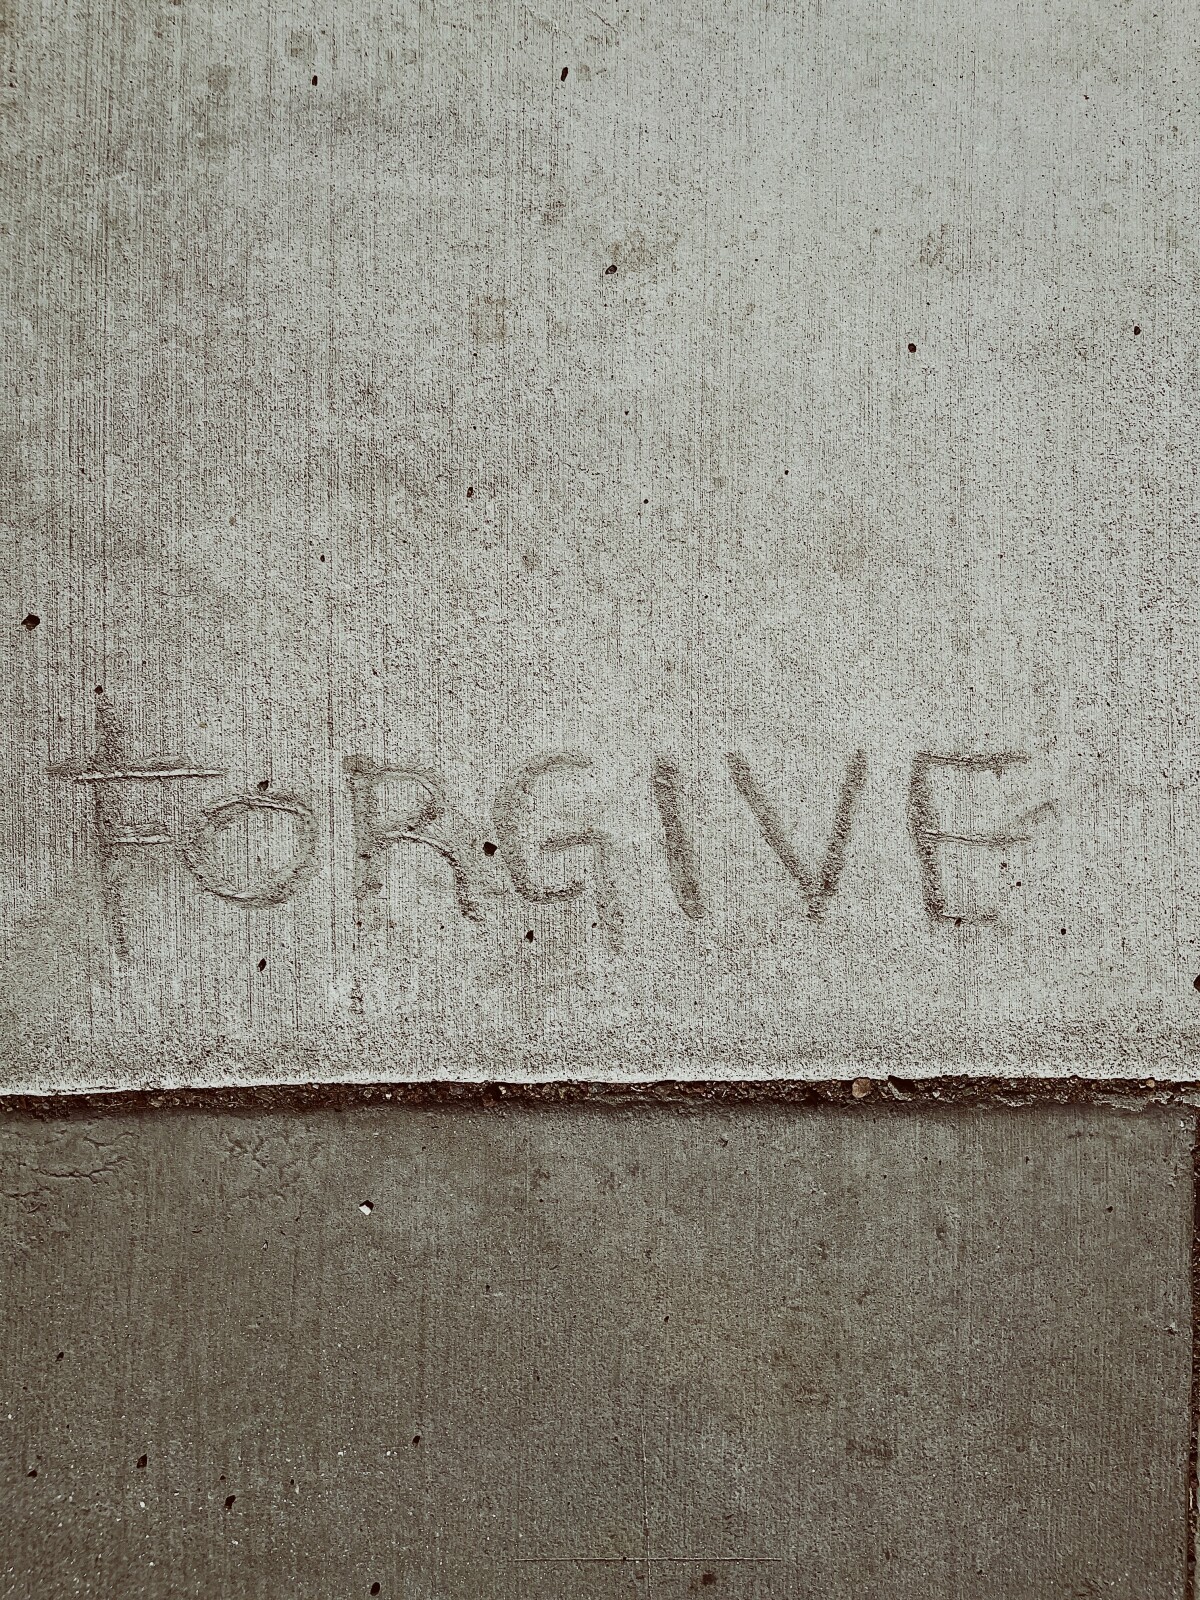 The Power of Unforgiveness and Its Correlation to Migraines